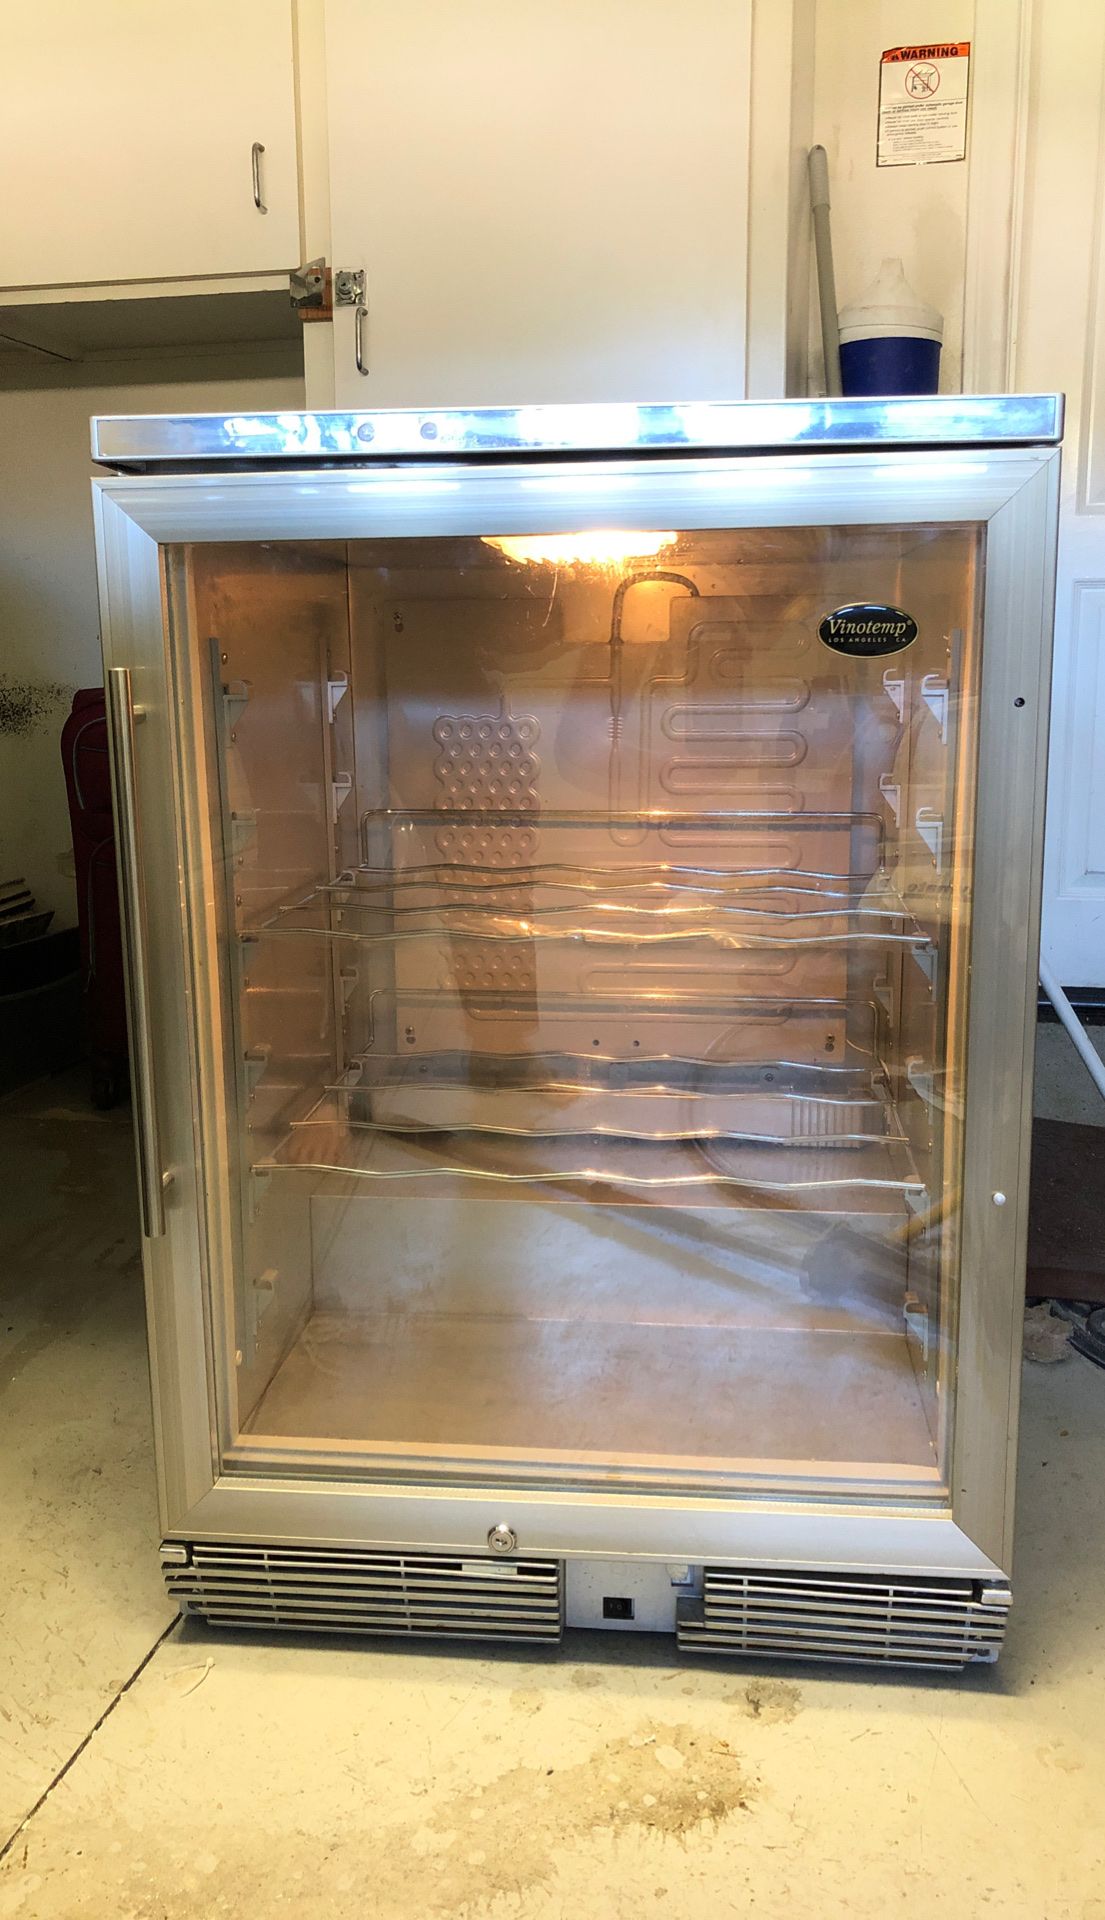 Vinotemp wine Refridgerator works great cost 1600.00 new selling it for 200.00